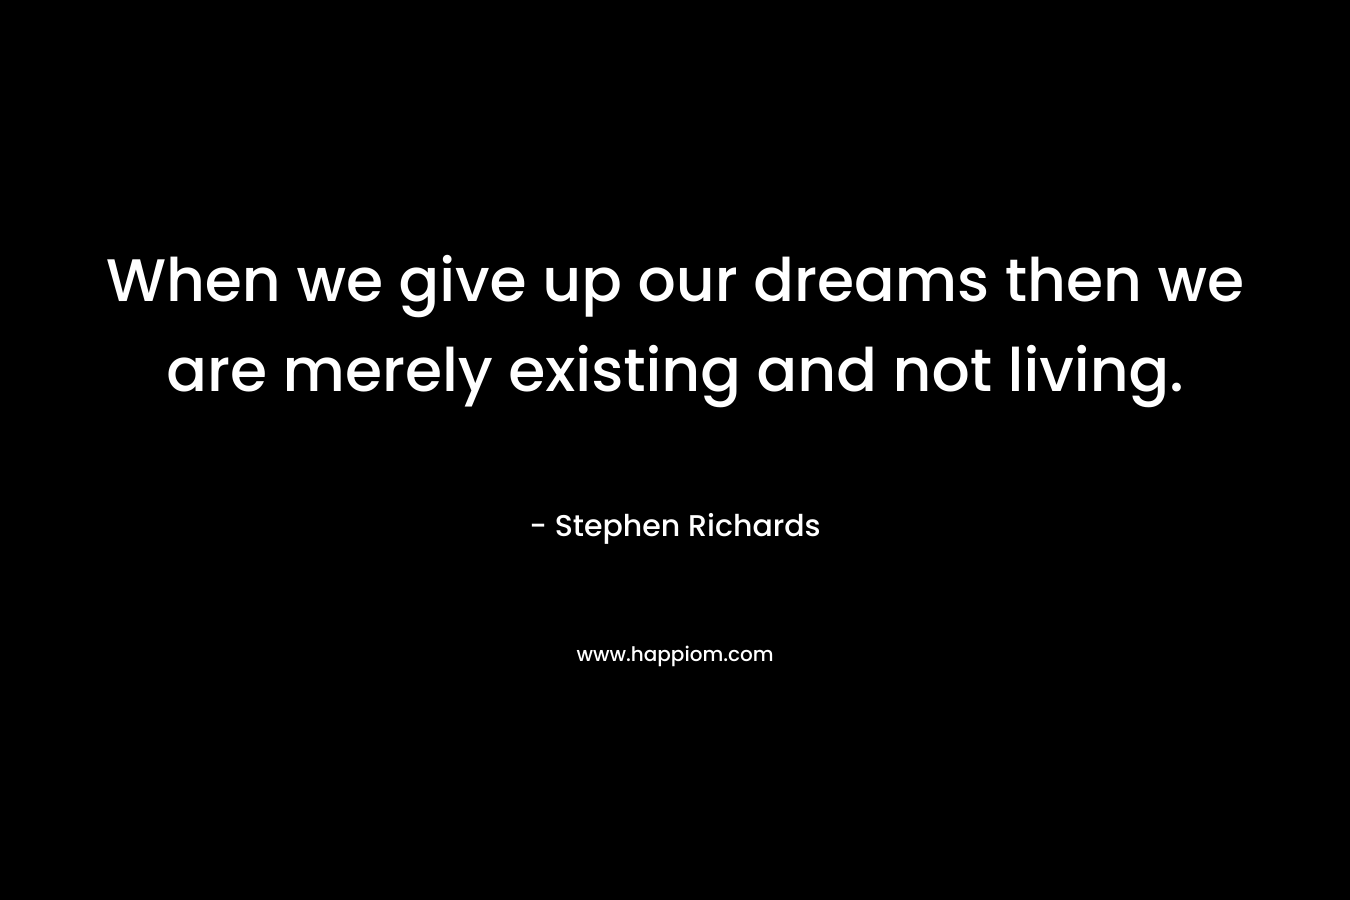 When we give up our dreams then we are merely existing and not living.